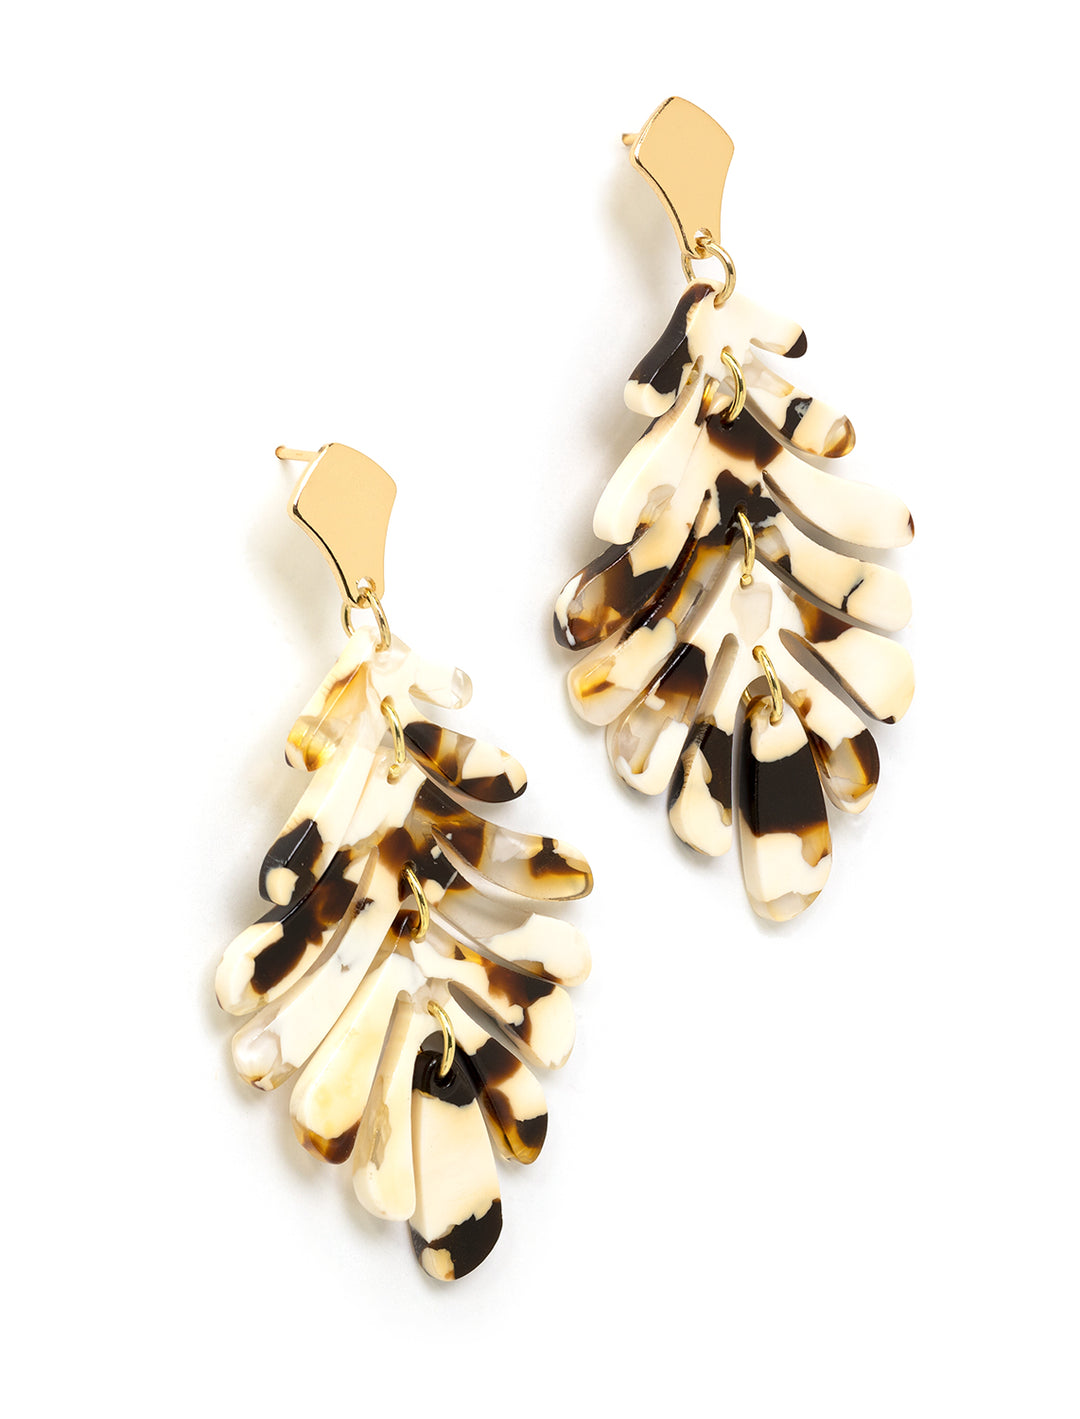 Stylized laydown of St. Armands' cocoa petite palm earrings.